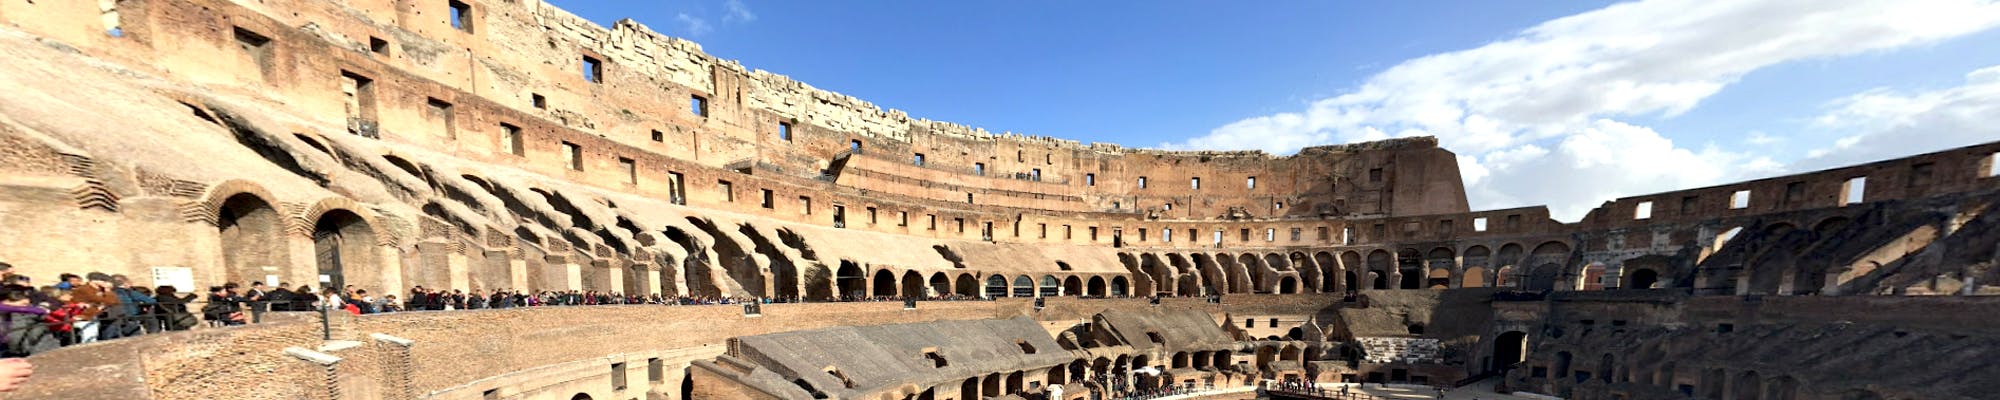 Virtual tour of the Colosseum from home Musement